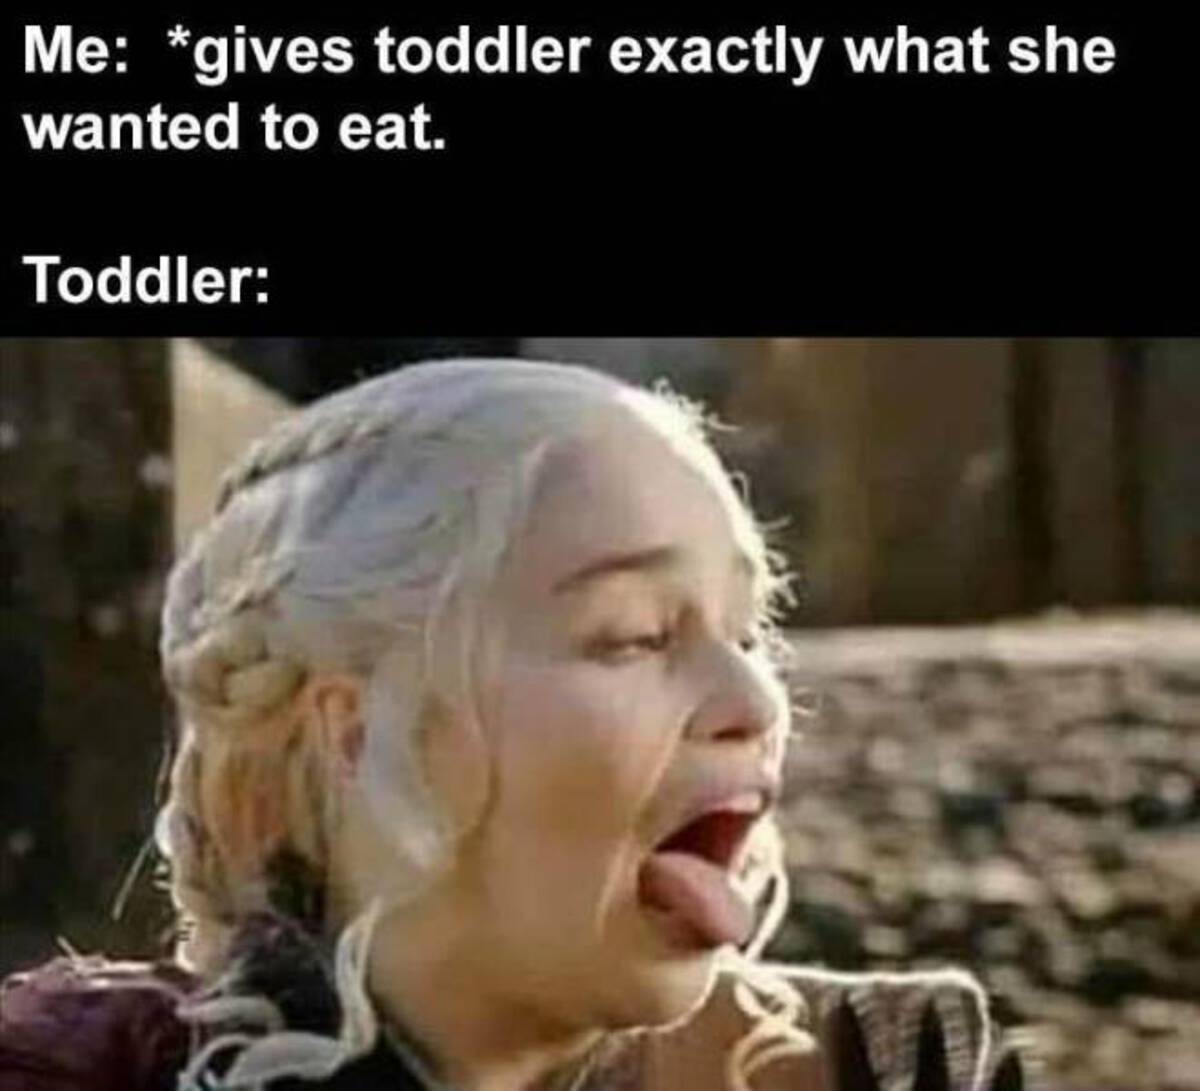 you are my queen jon snow - Me gives toddler exactly what she wanted to eat. Toddler